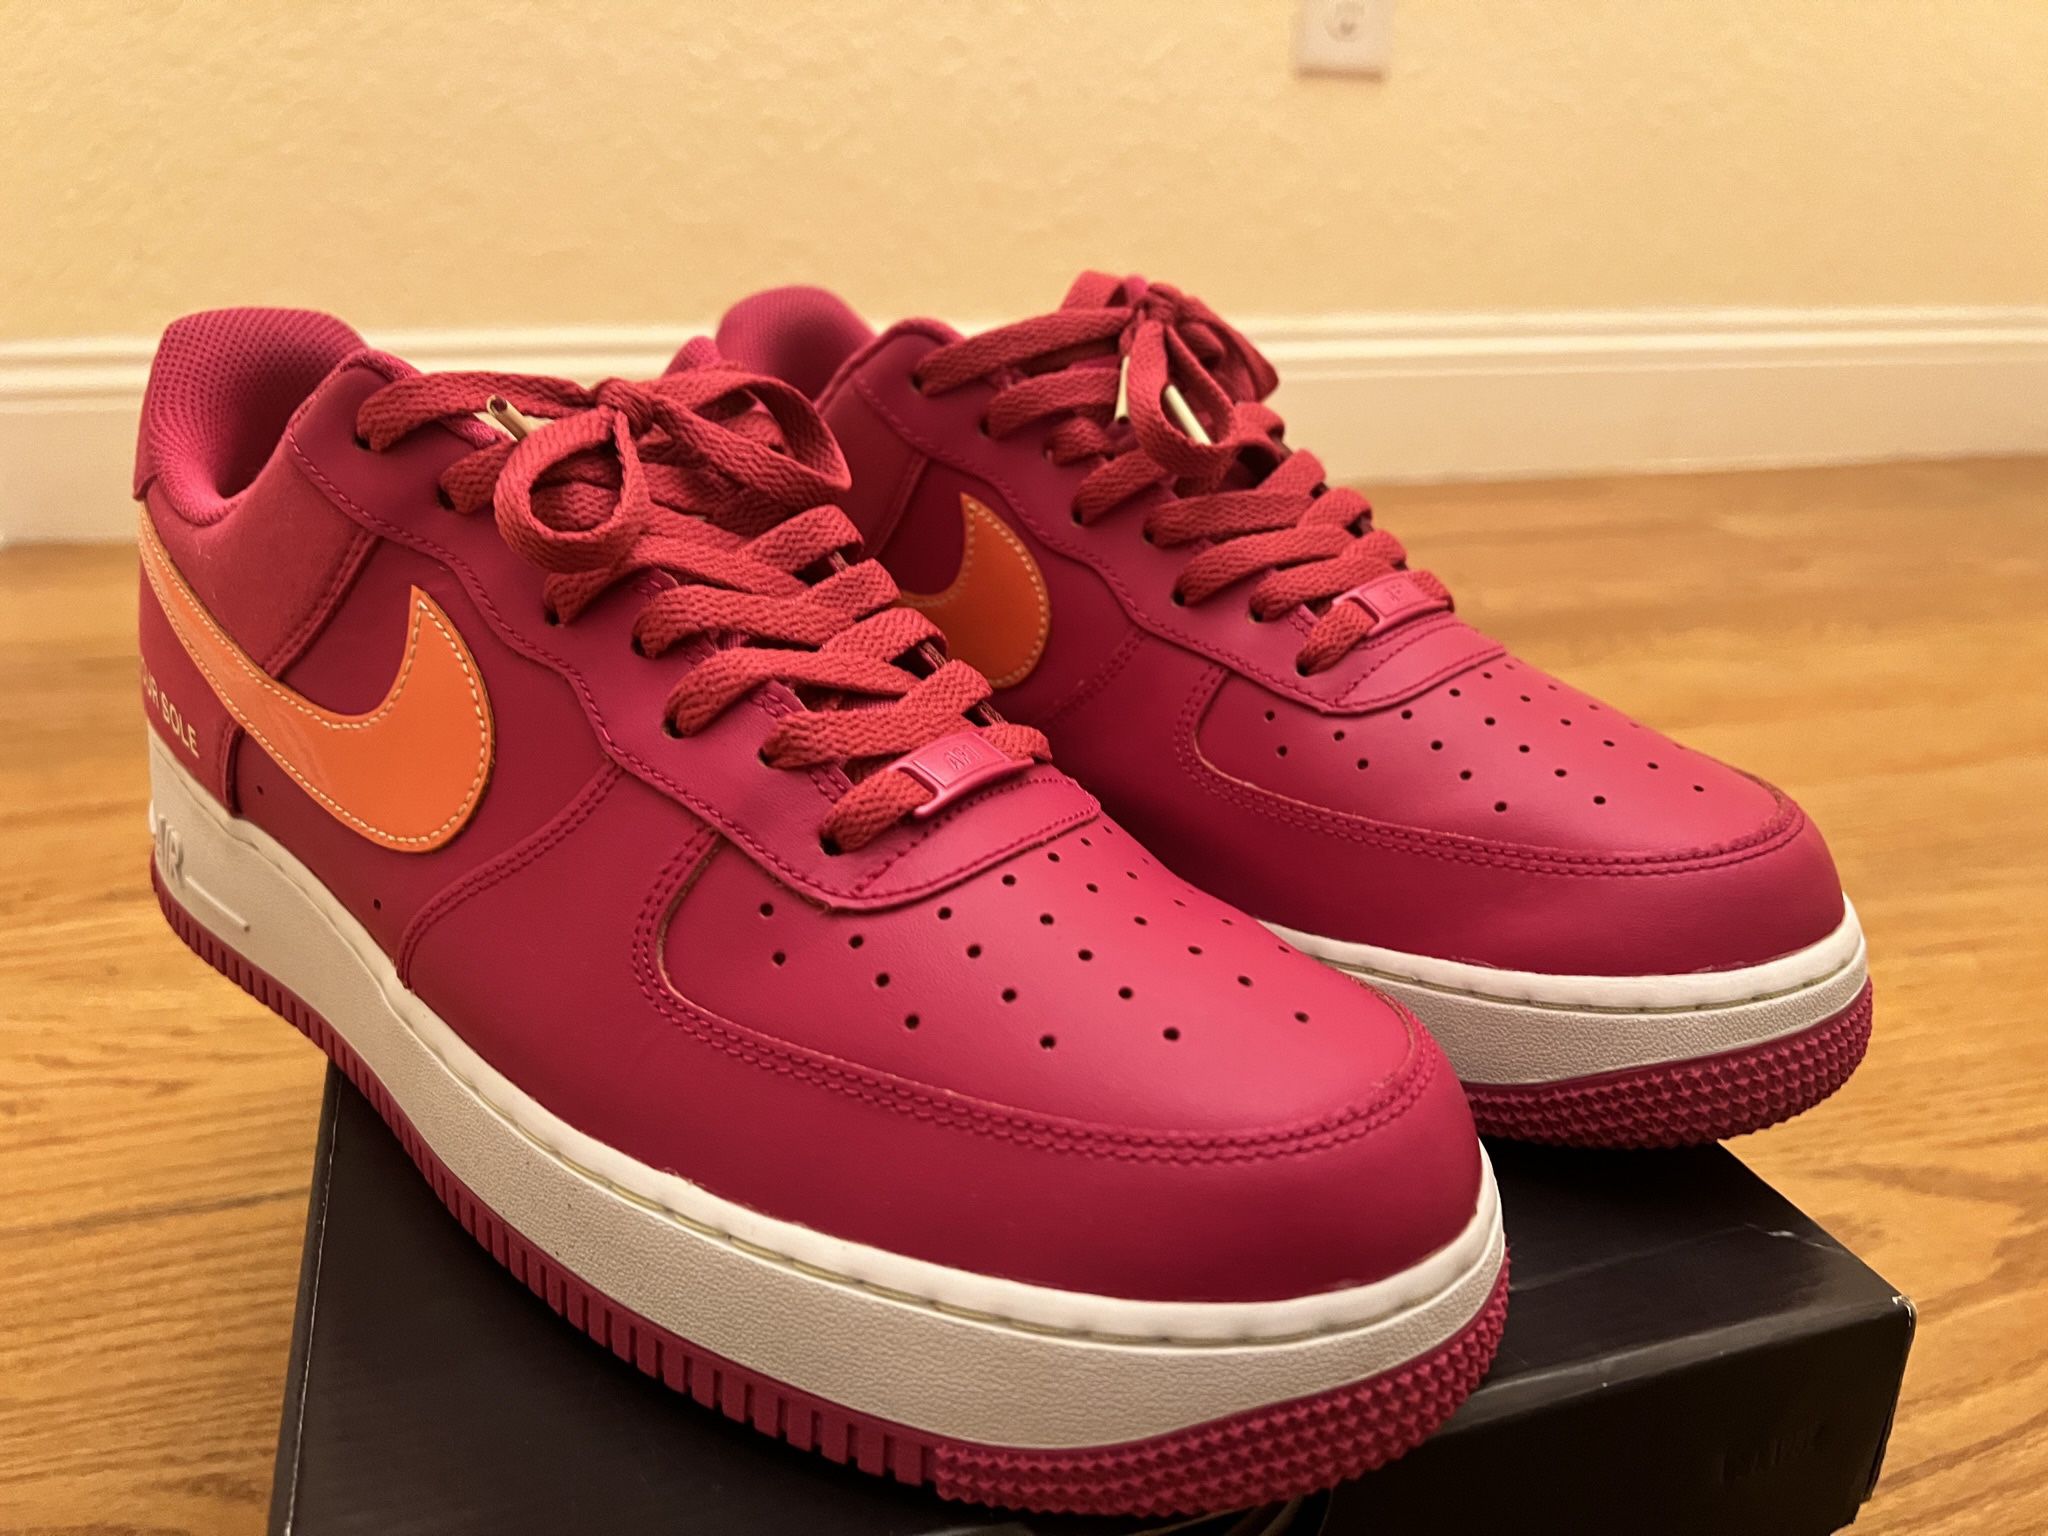 Nike Air Force 1 Low World Tour Size 12 Magenta/Volt/White (read More Details Before Making An Offer) 